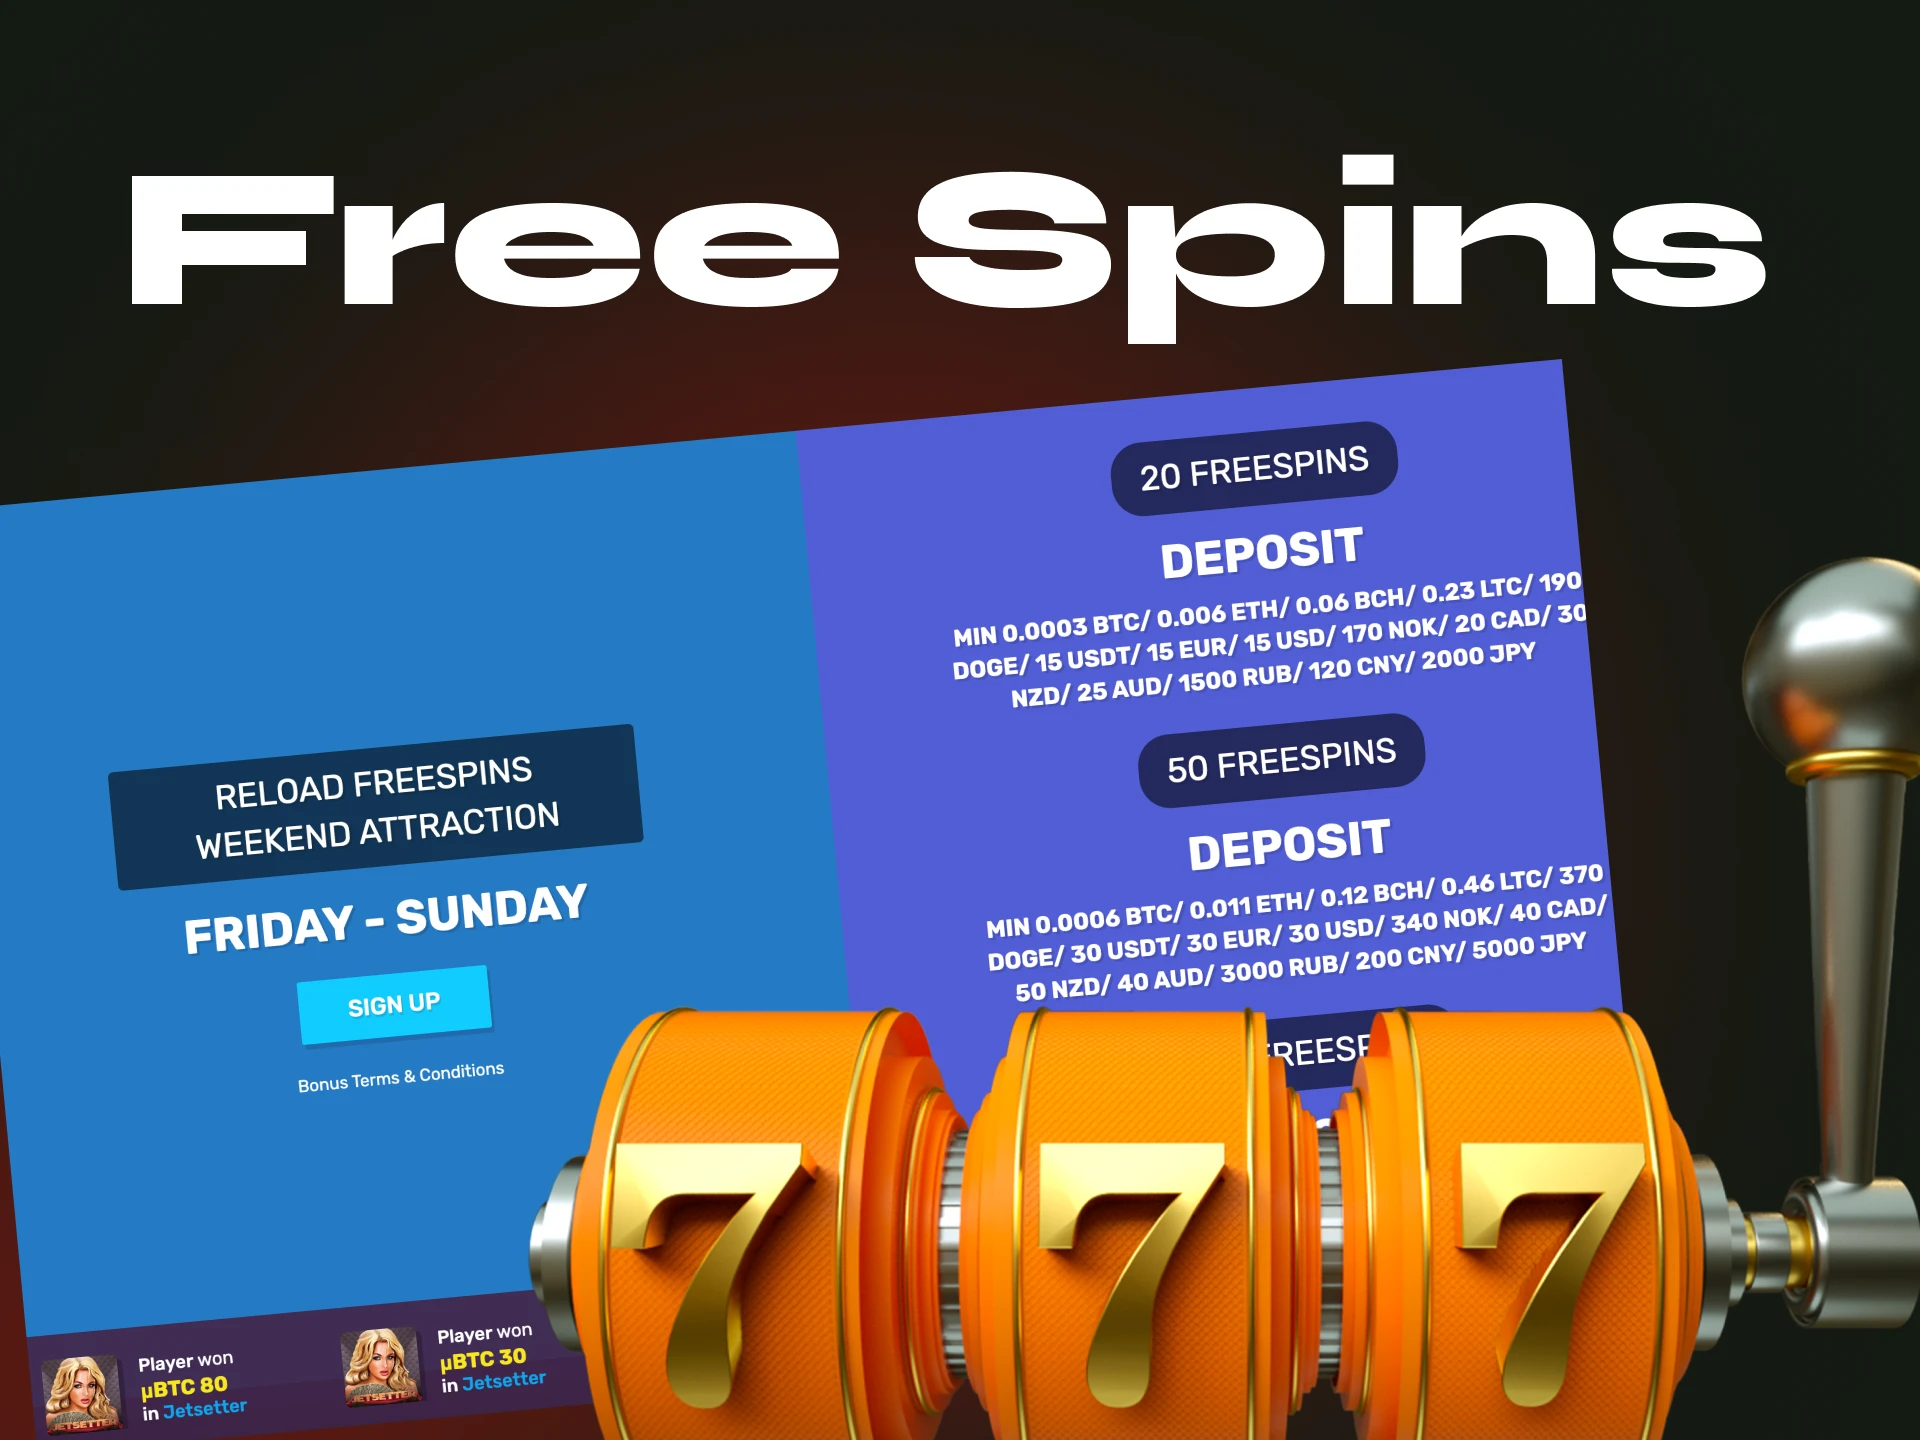 What can I use the free spins bonus for.